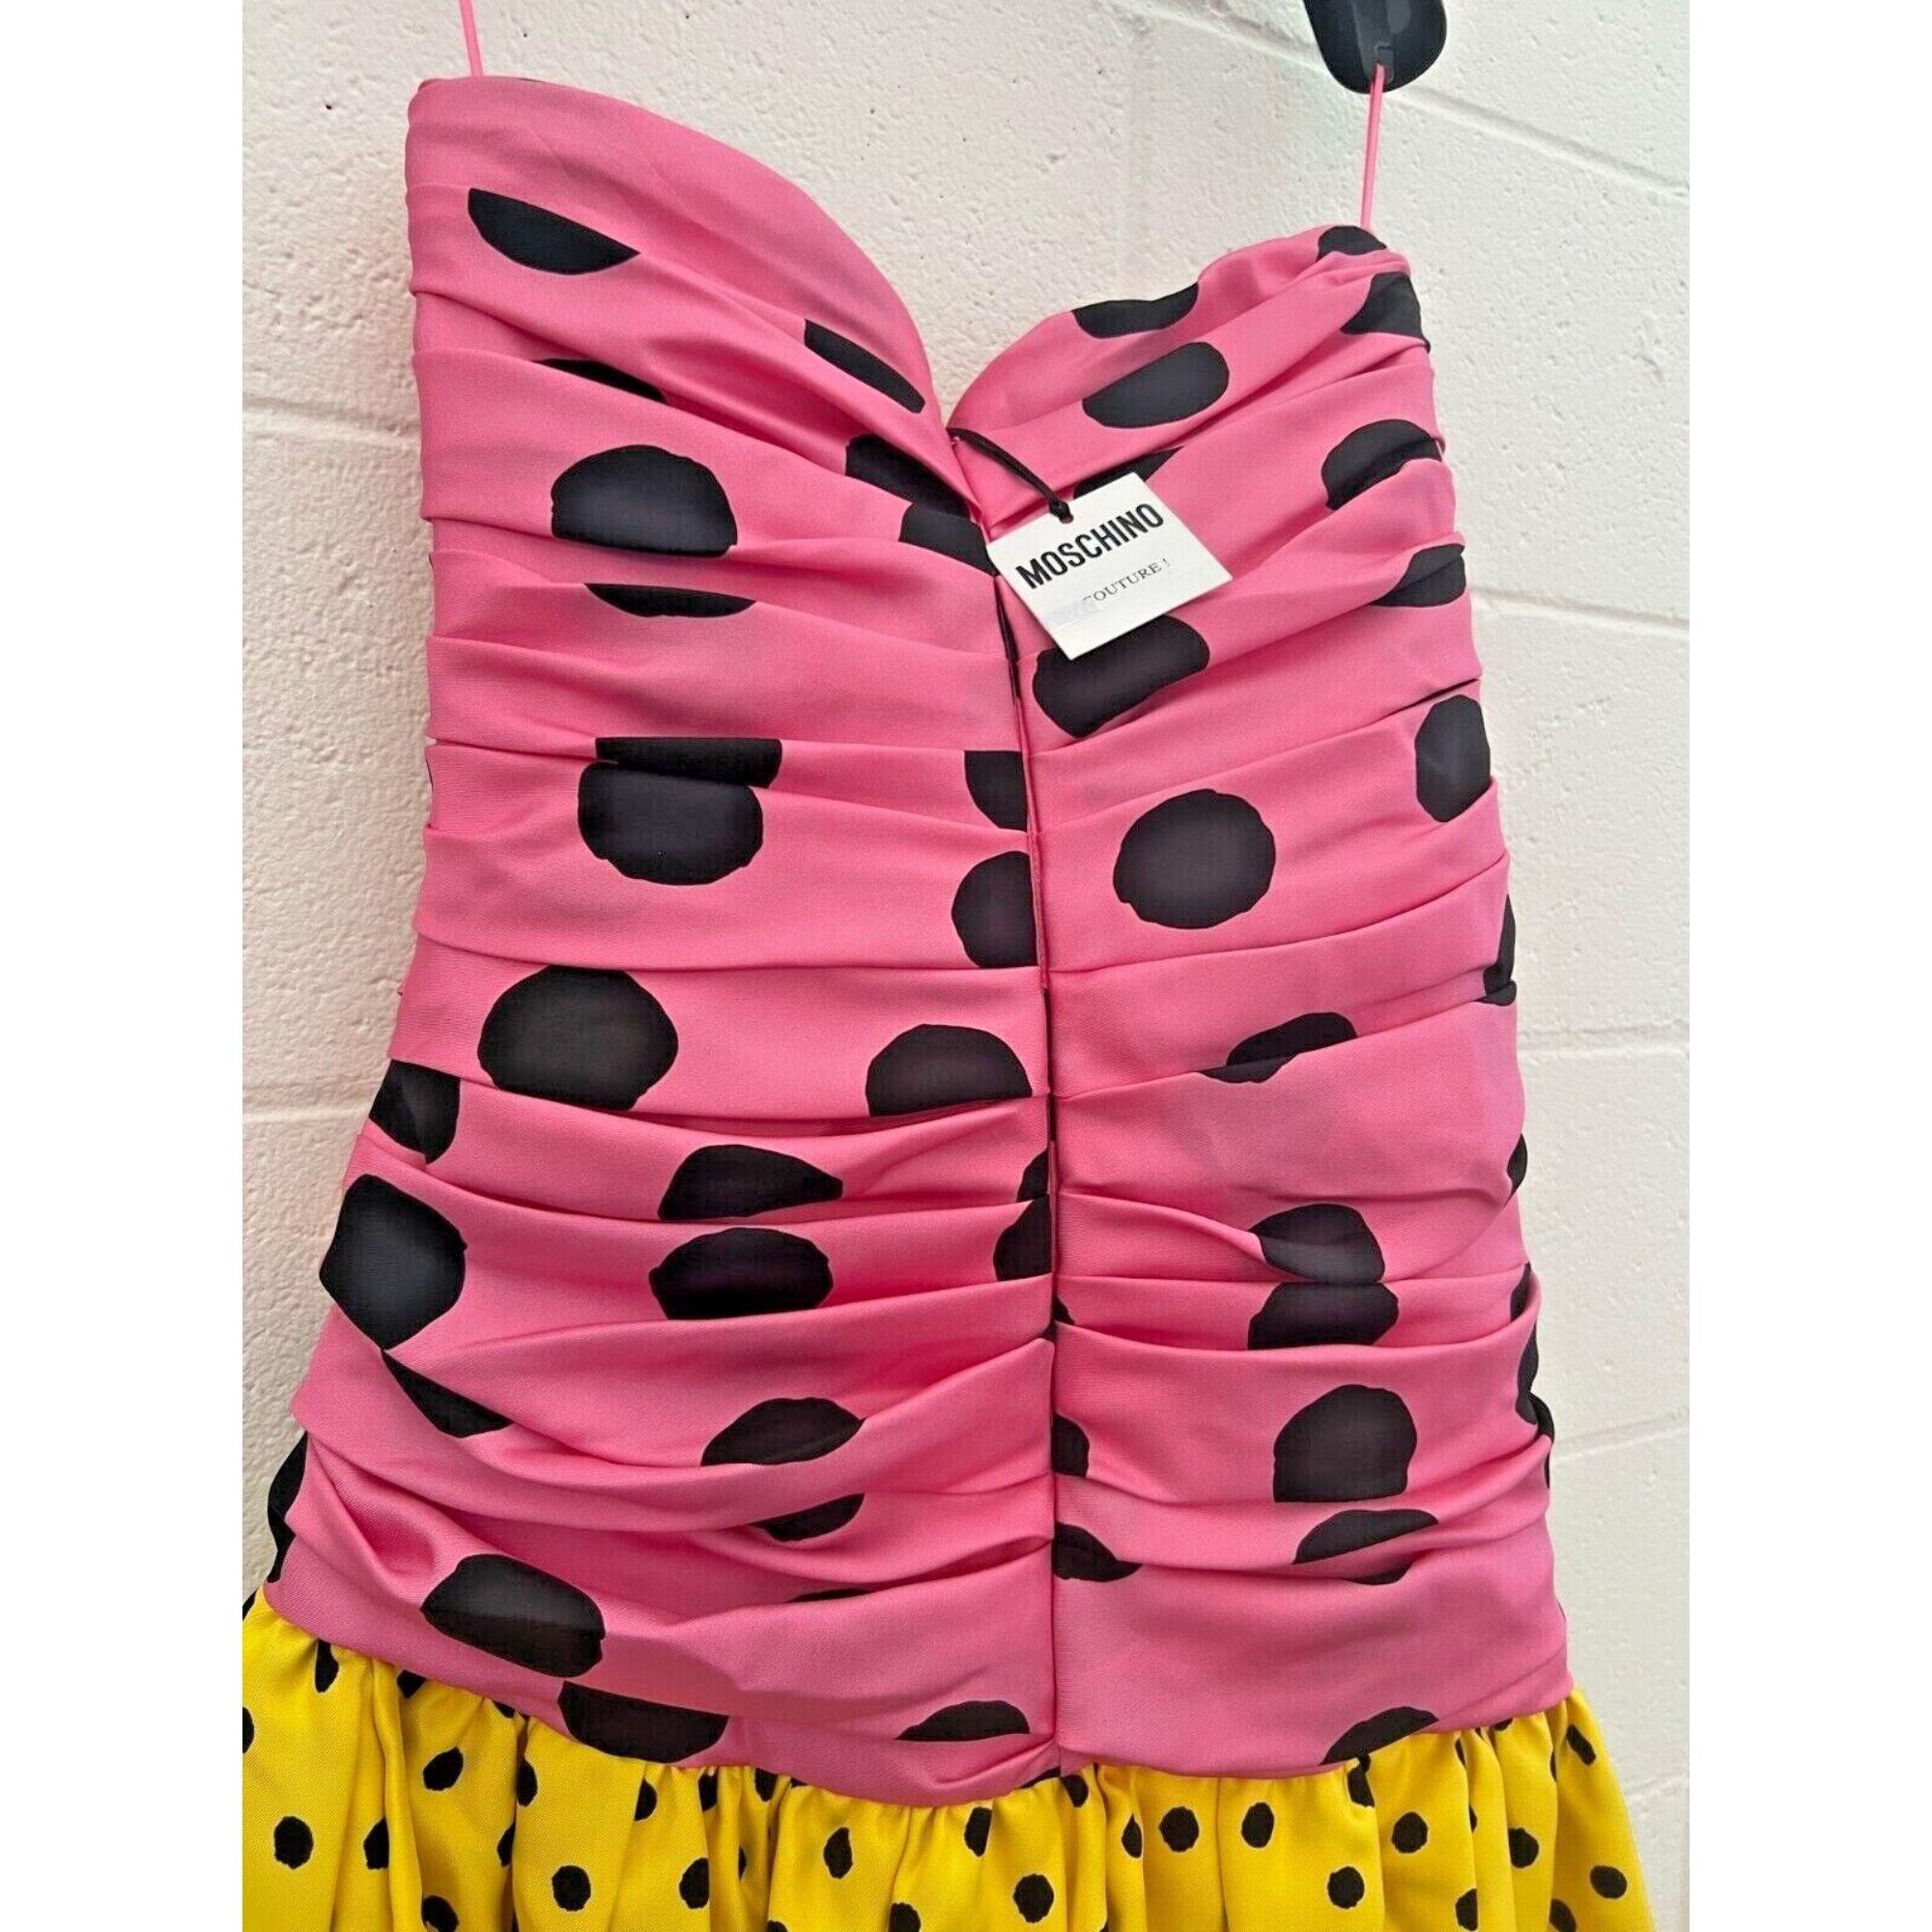 SS21 Moschino Couture Pink Yellow Strapless Polka Dot Mini Dress by Jeremy Scott For Sale 2